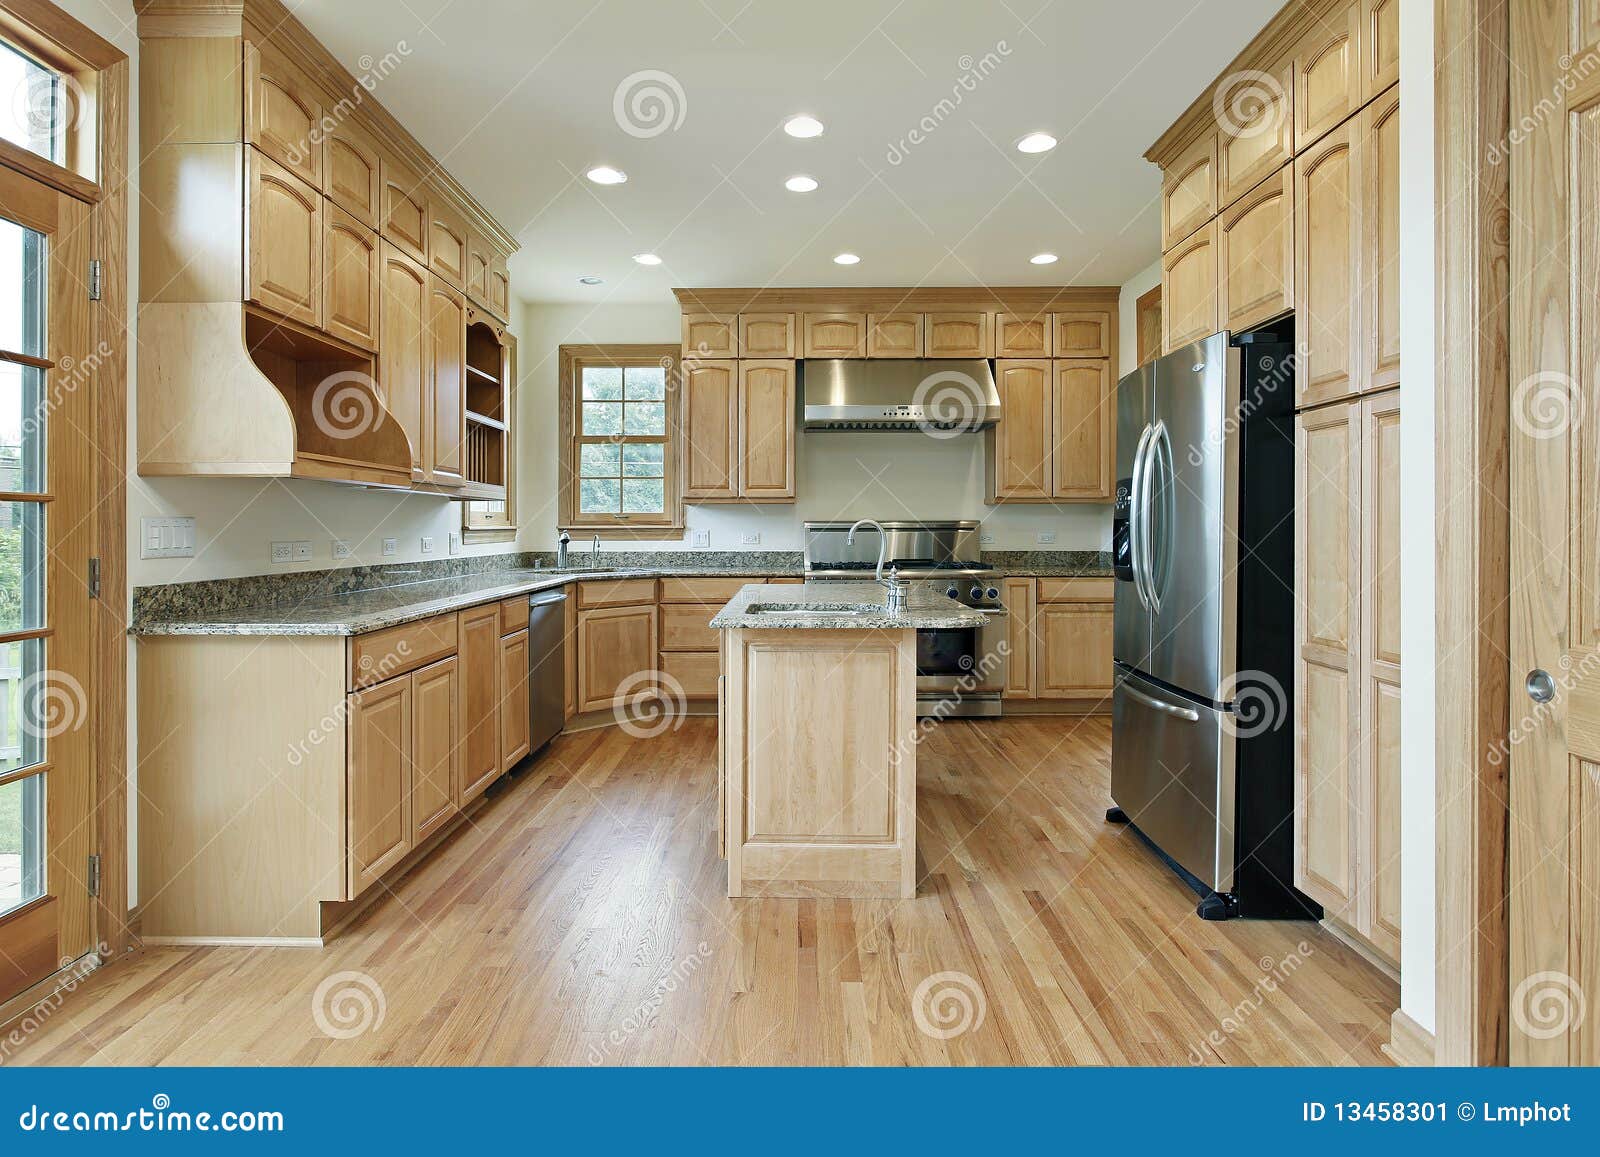 Kitchen With Oak Wood Cabinetry Stock Image - Image of 